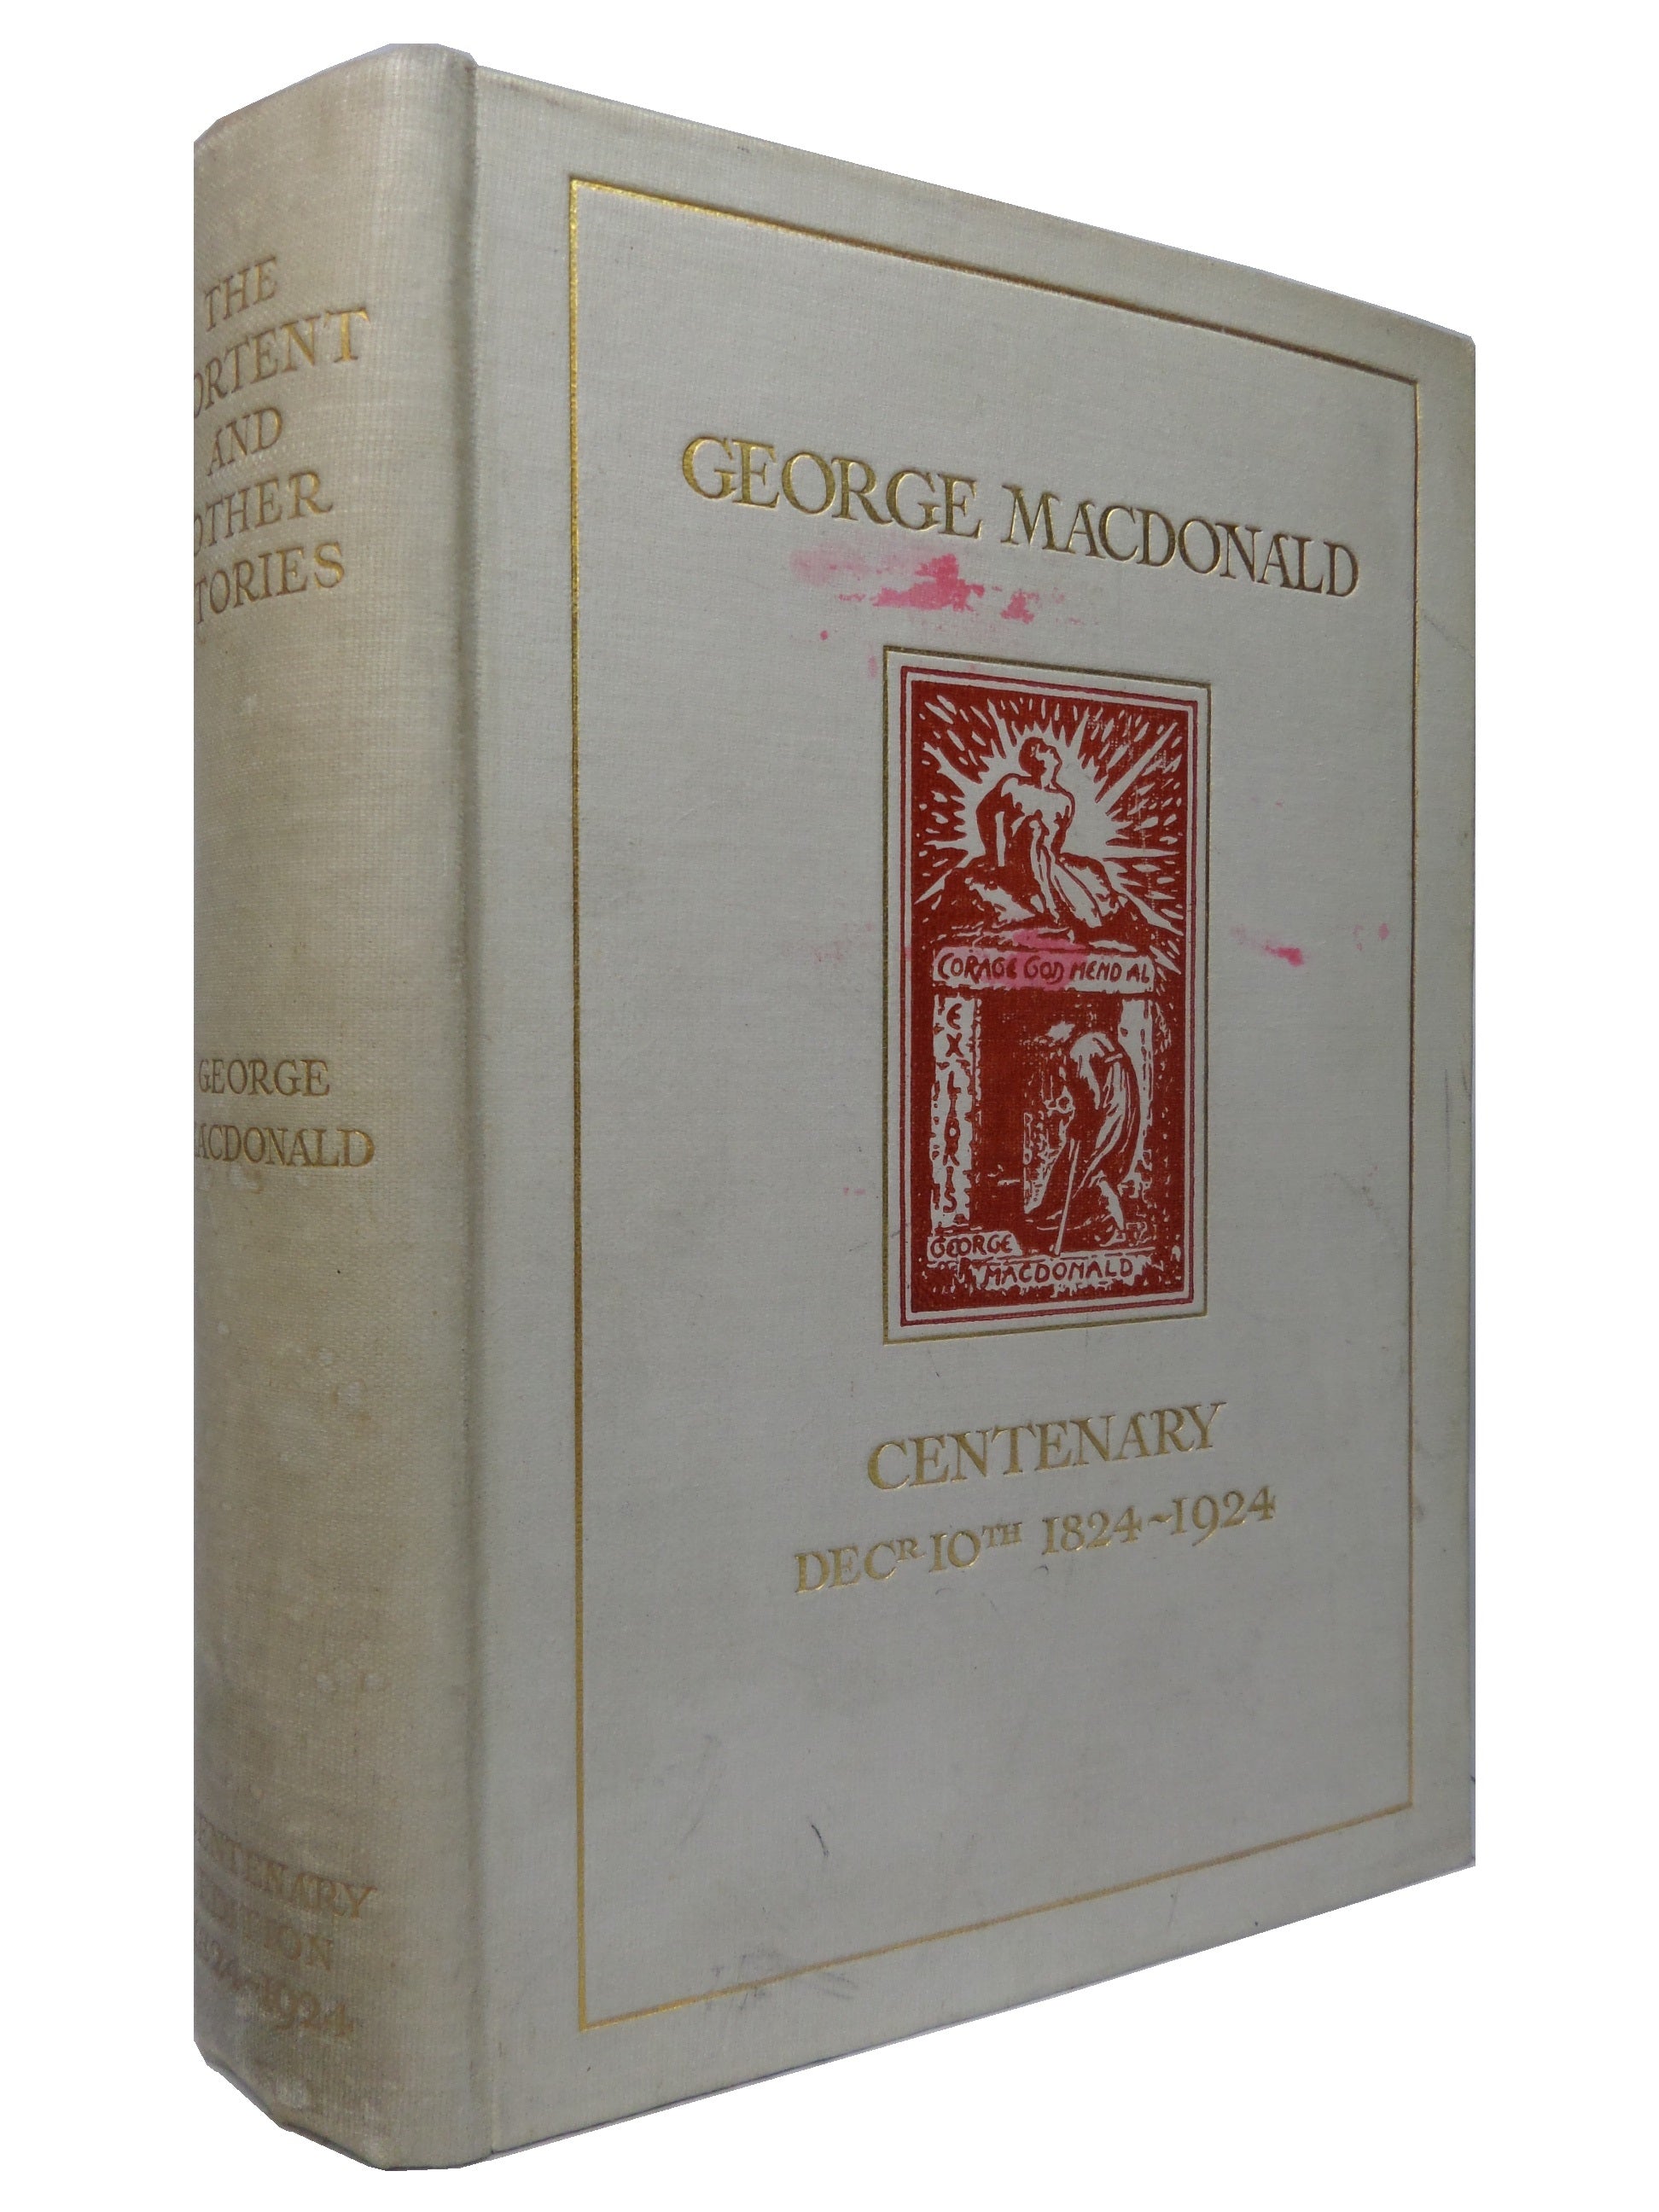 THE PORTENT AND OTHER STORIES 1924 GEORGE MACDONALD CENTENARY EDITION